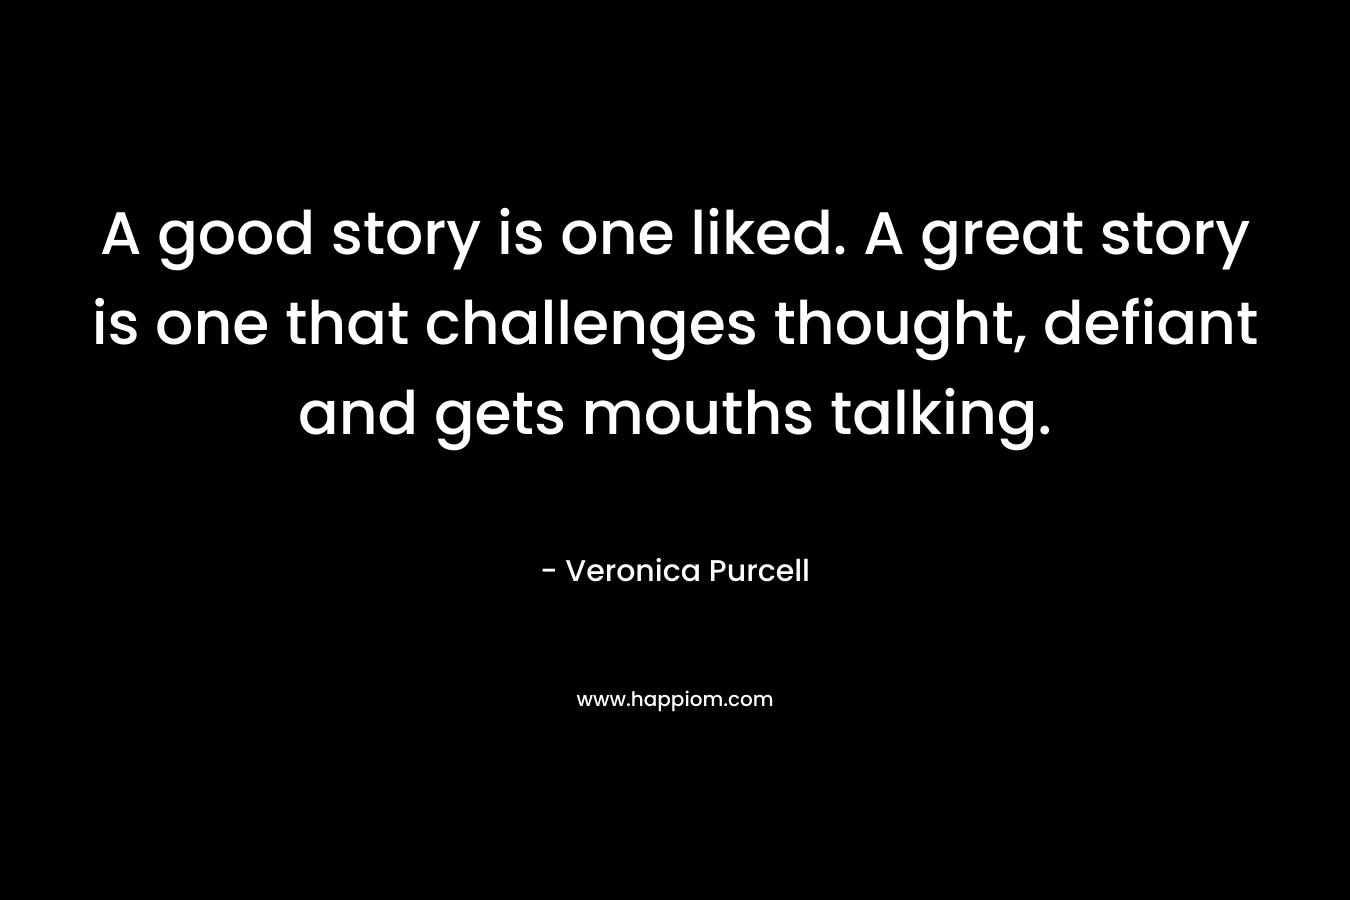 A good story is one liked. A great story is one that challenges thought, defiant and gets mouths talking. – Veronica Purcell